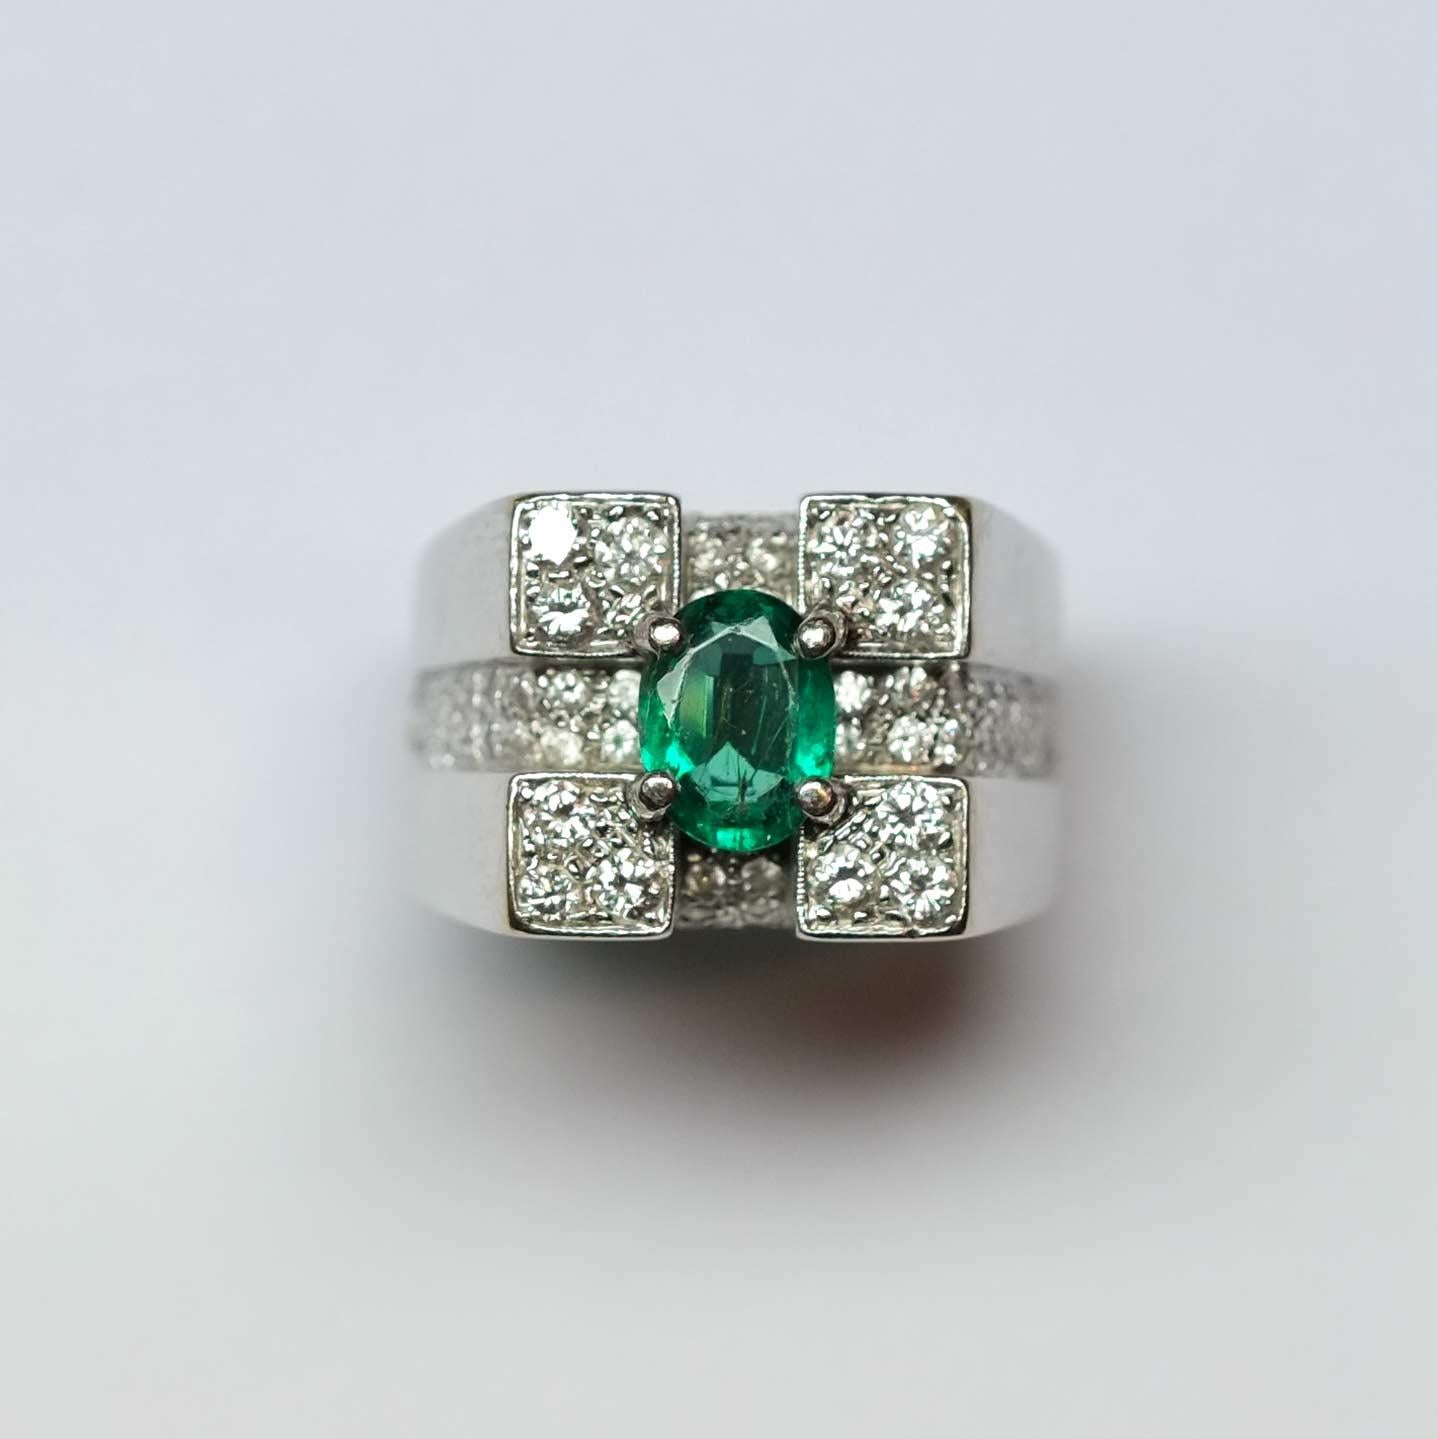 Very unusual geometric cocktail ring from the 1940s circa. Set in 18ct white gold with diamonds and central oval cut emerald. Made in Italy.

Highlights
- Cocktail ring set in 18ct white gold stamped 750 - Made in Italy
- Emerald of circa 1ct with